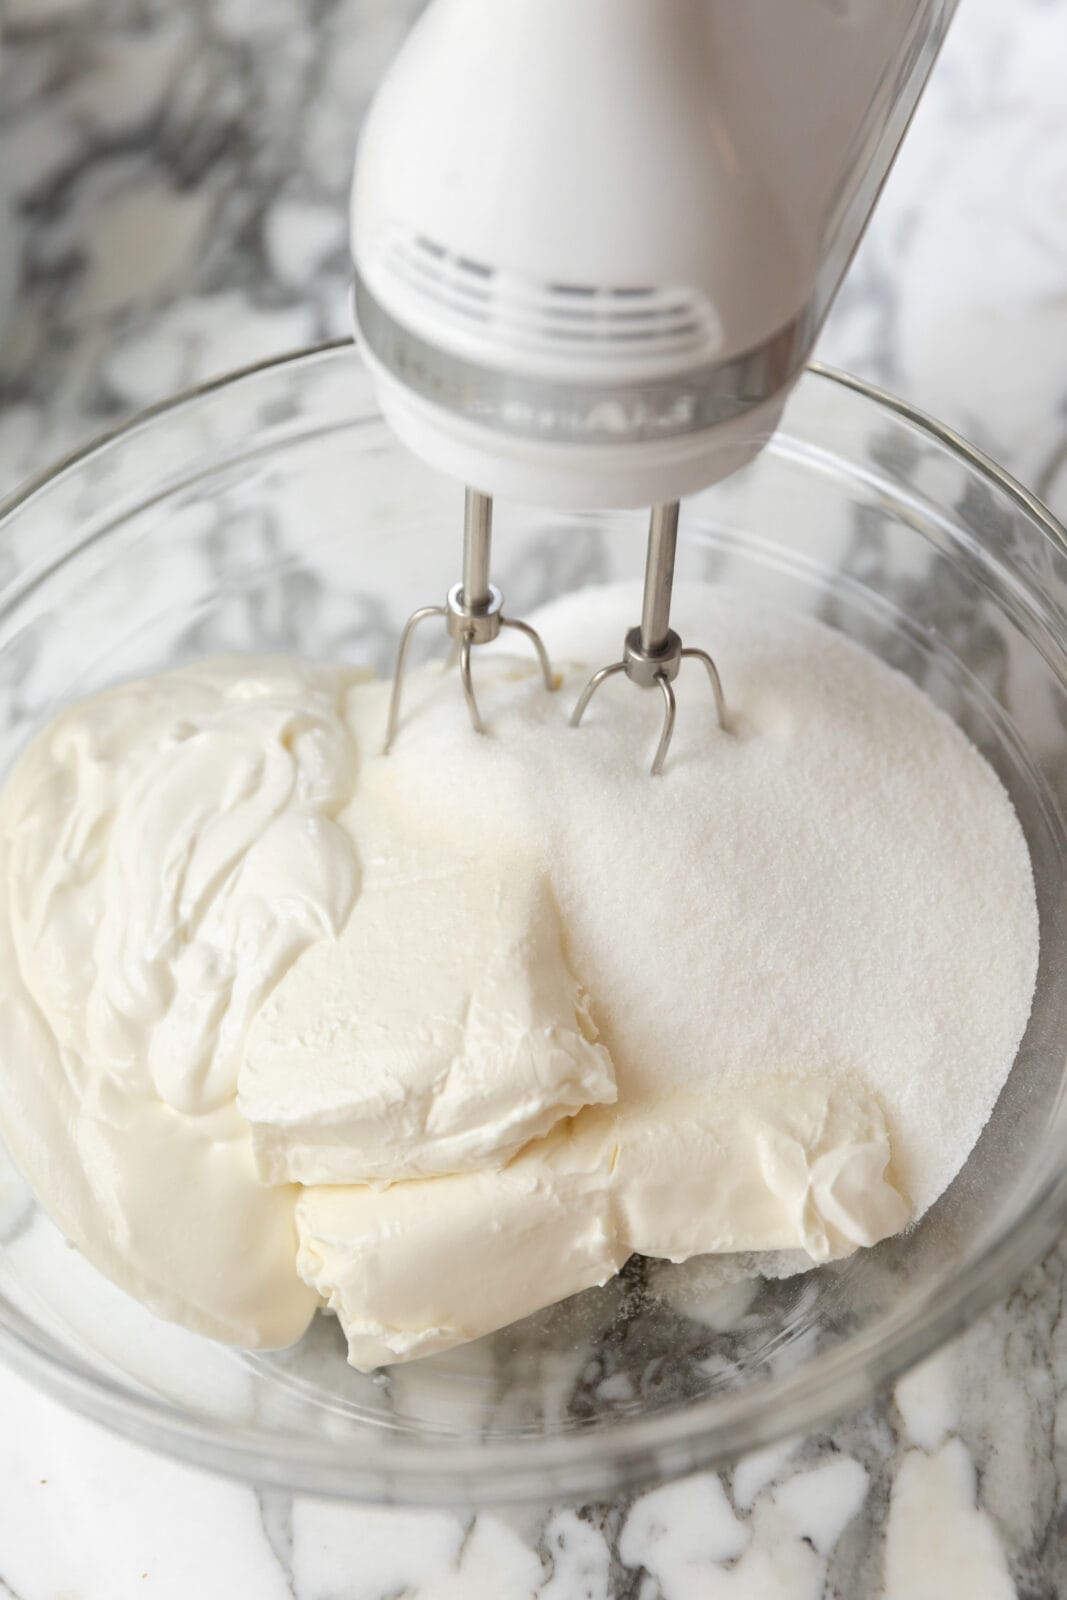 cream cheese and sugar mixing together